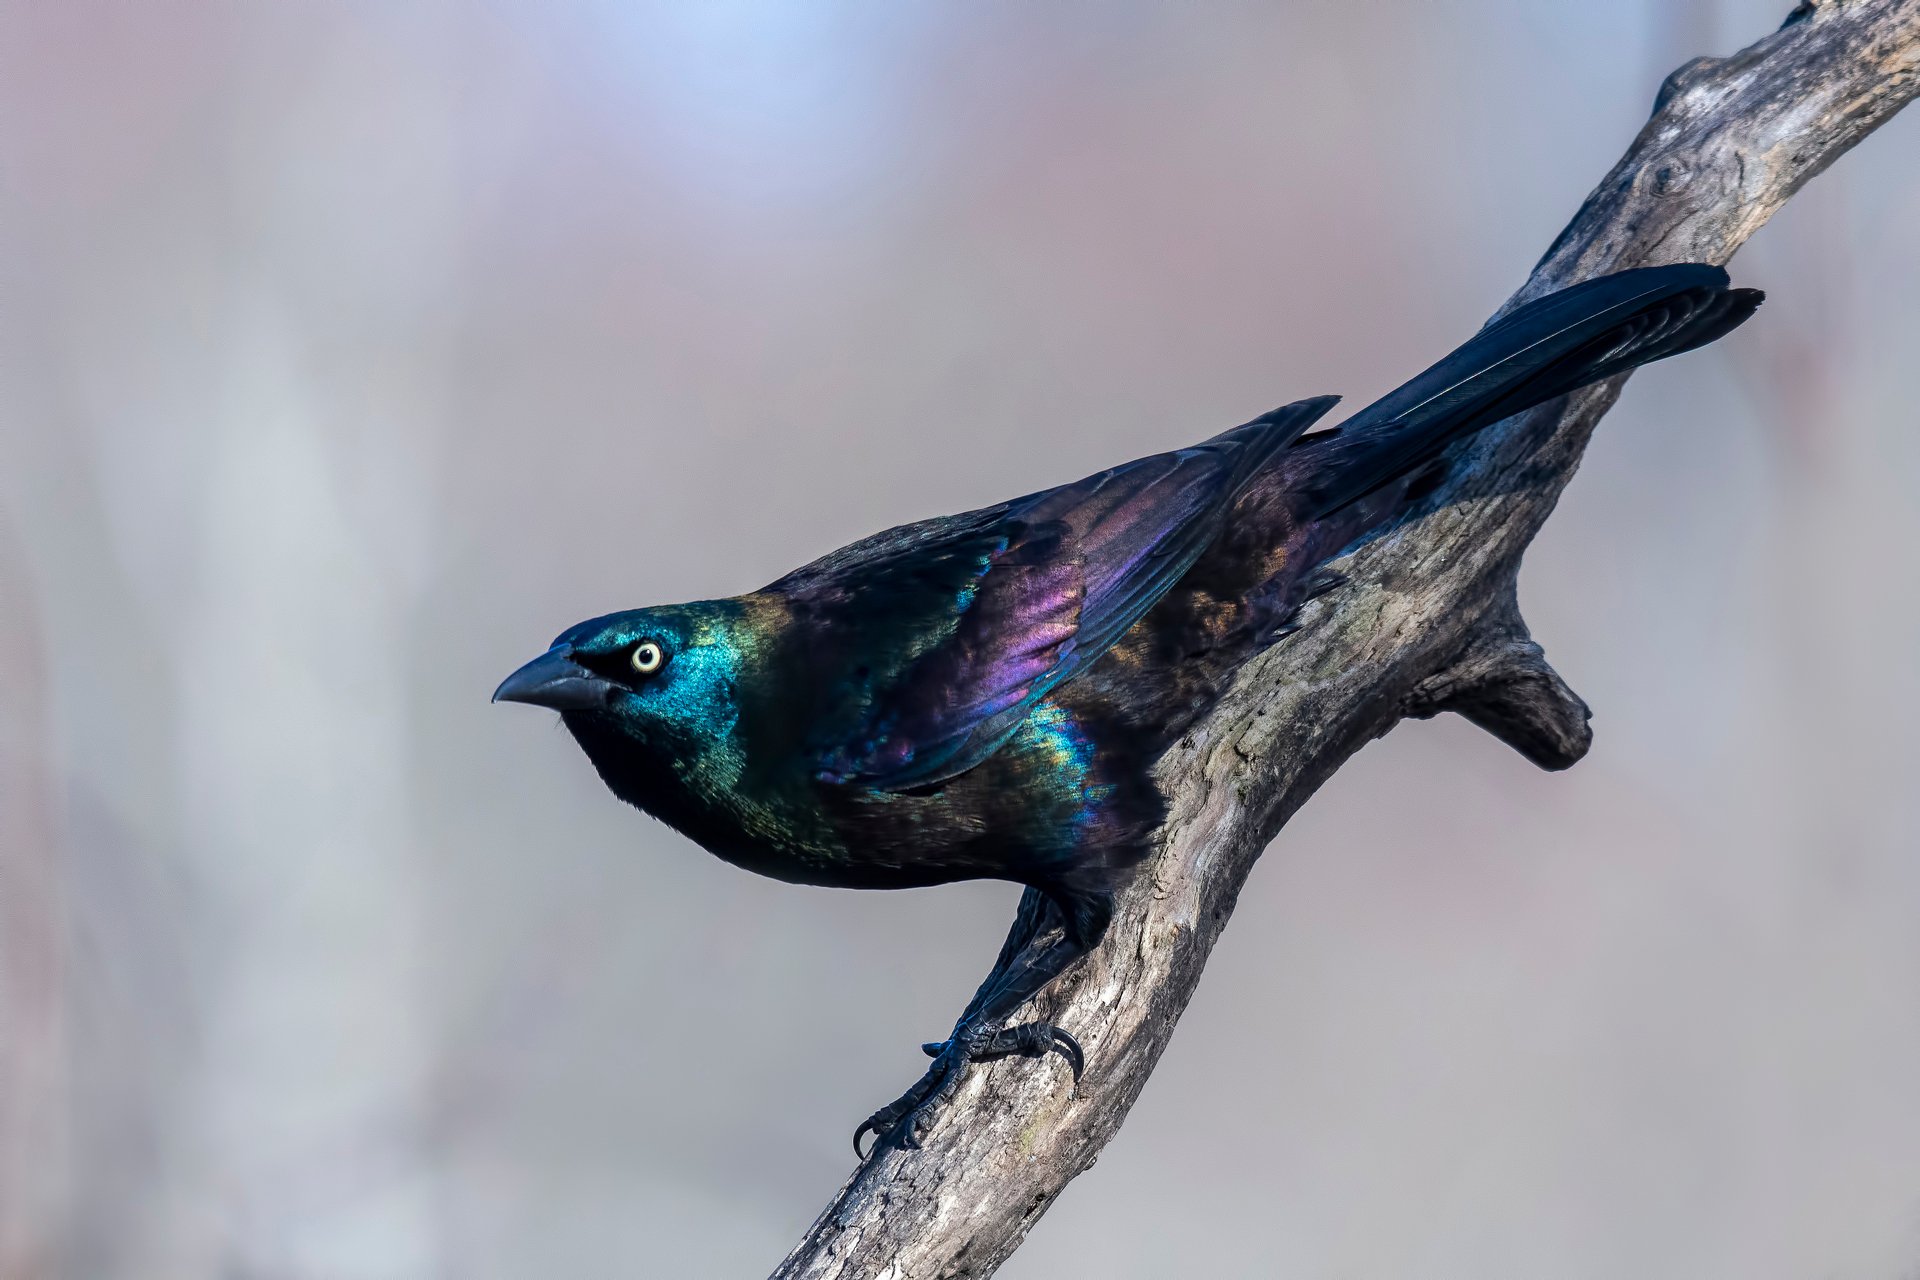 Common Grackle perched on branch